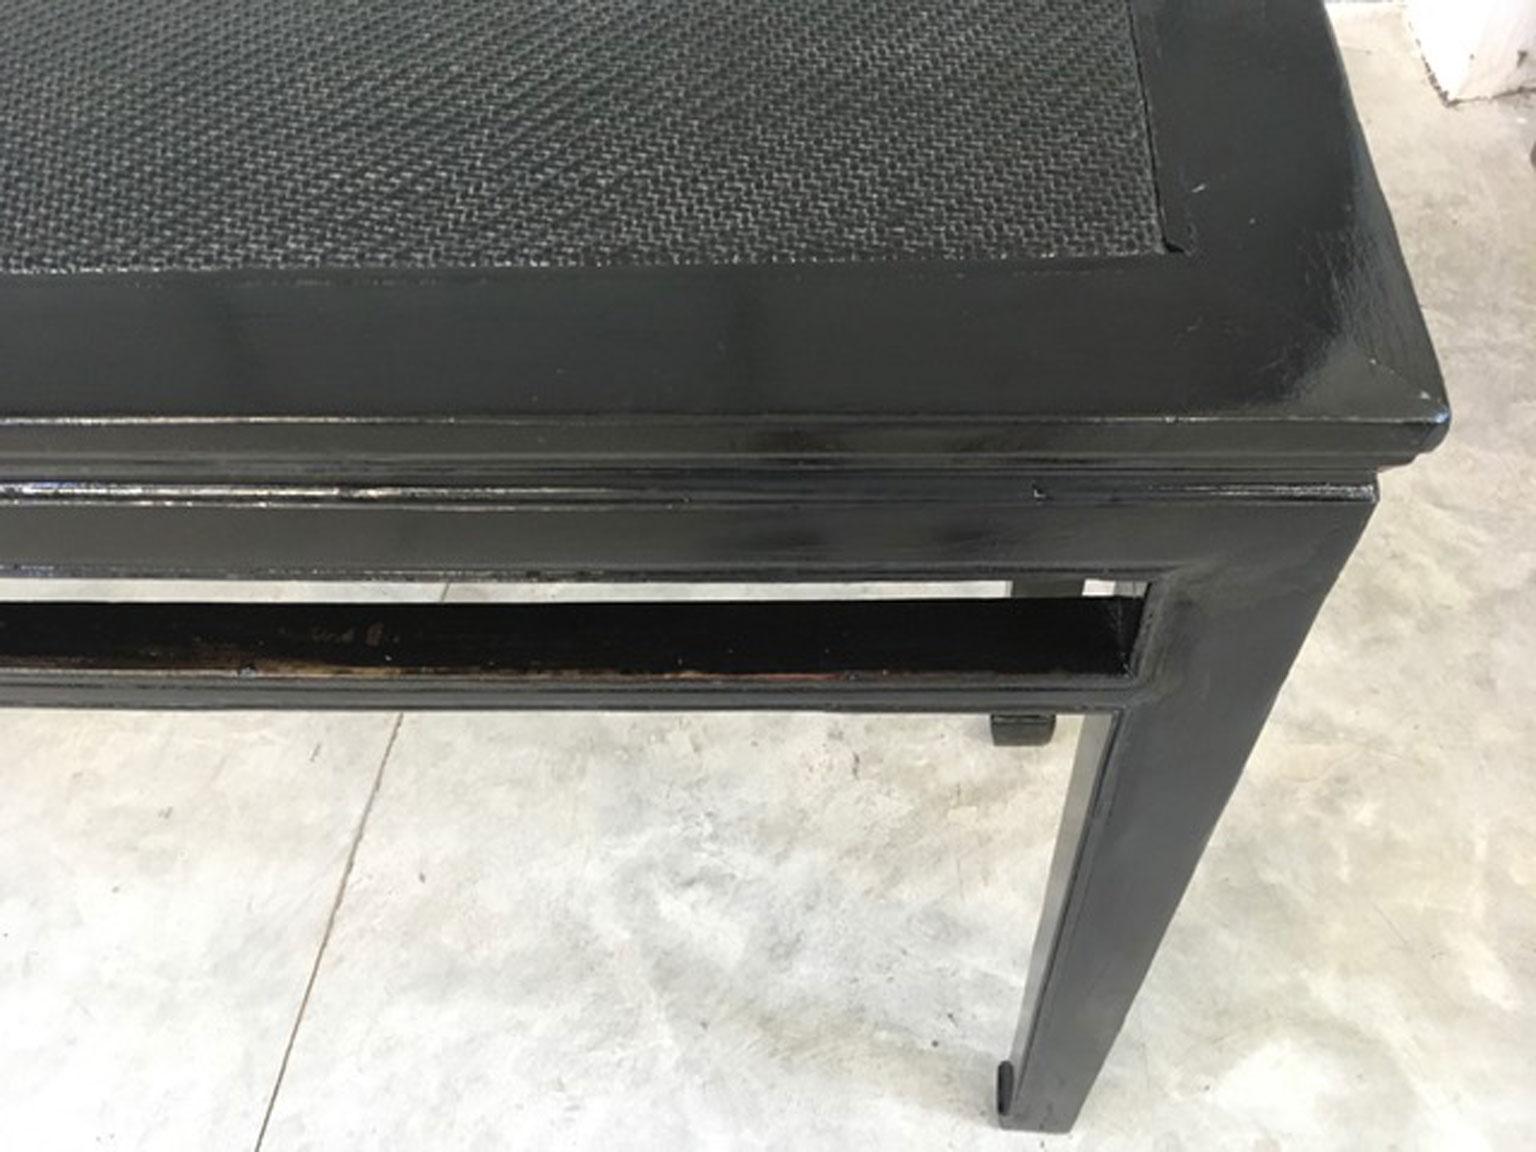 This console is an hand crafted piece of furniture and was made in elm wood, typical of asian countries in Late 19th Century. It was cleaned and refreshed the old black finish.
This is a very contemporary piece for its simply line and black color